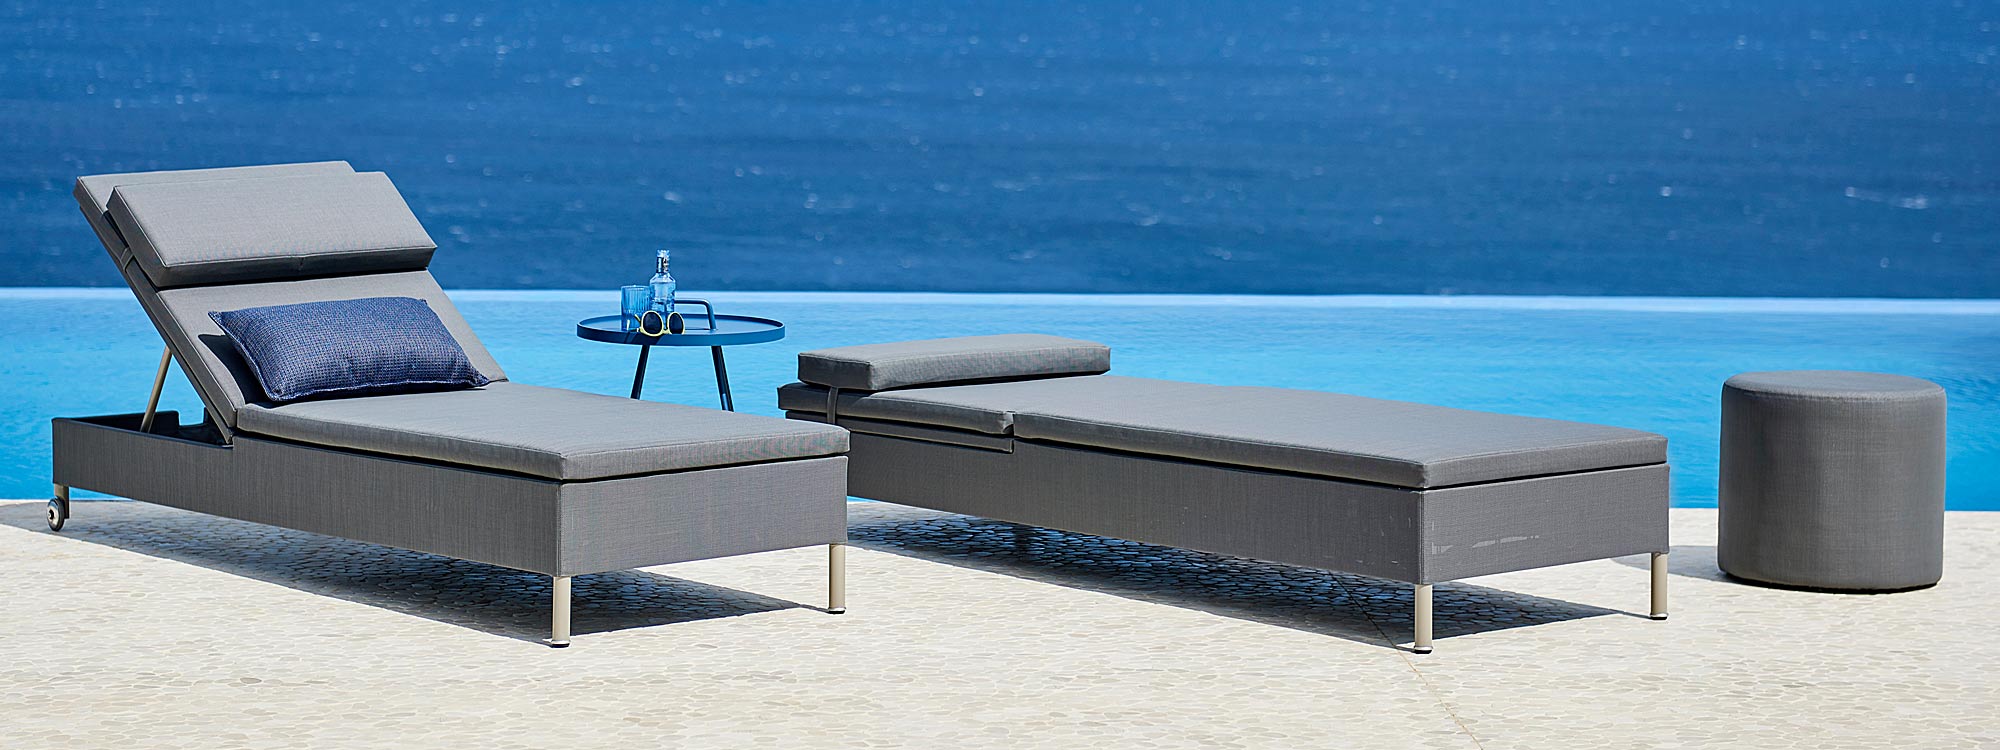 Image of pair of Caneline Rest grey sun loungers on poolside with sea in background